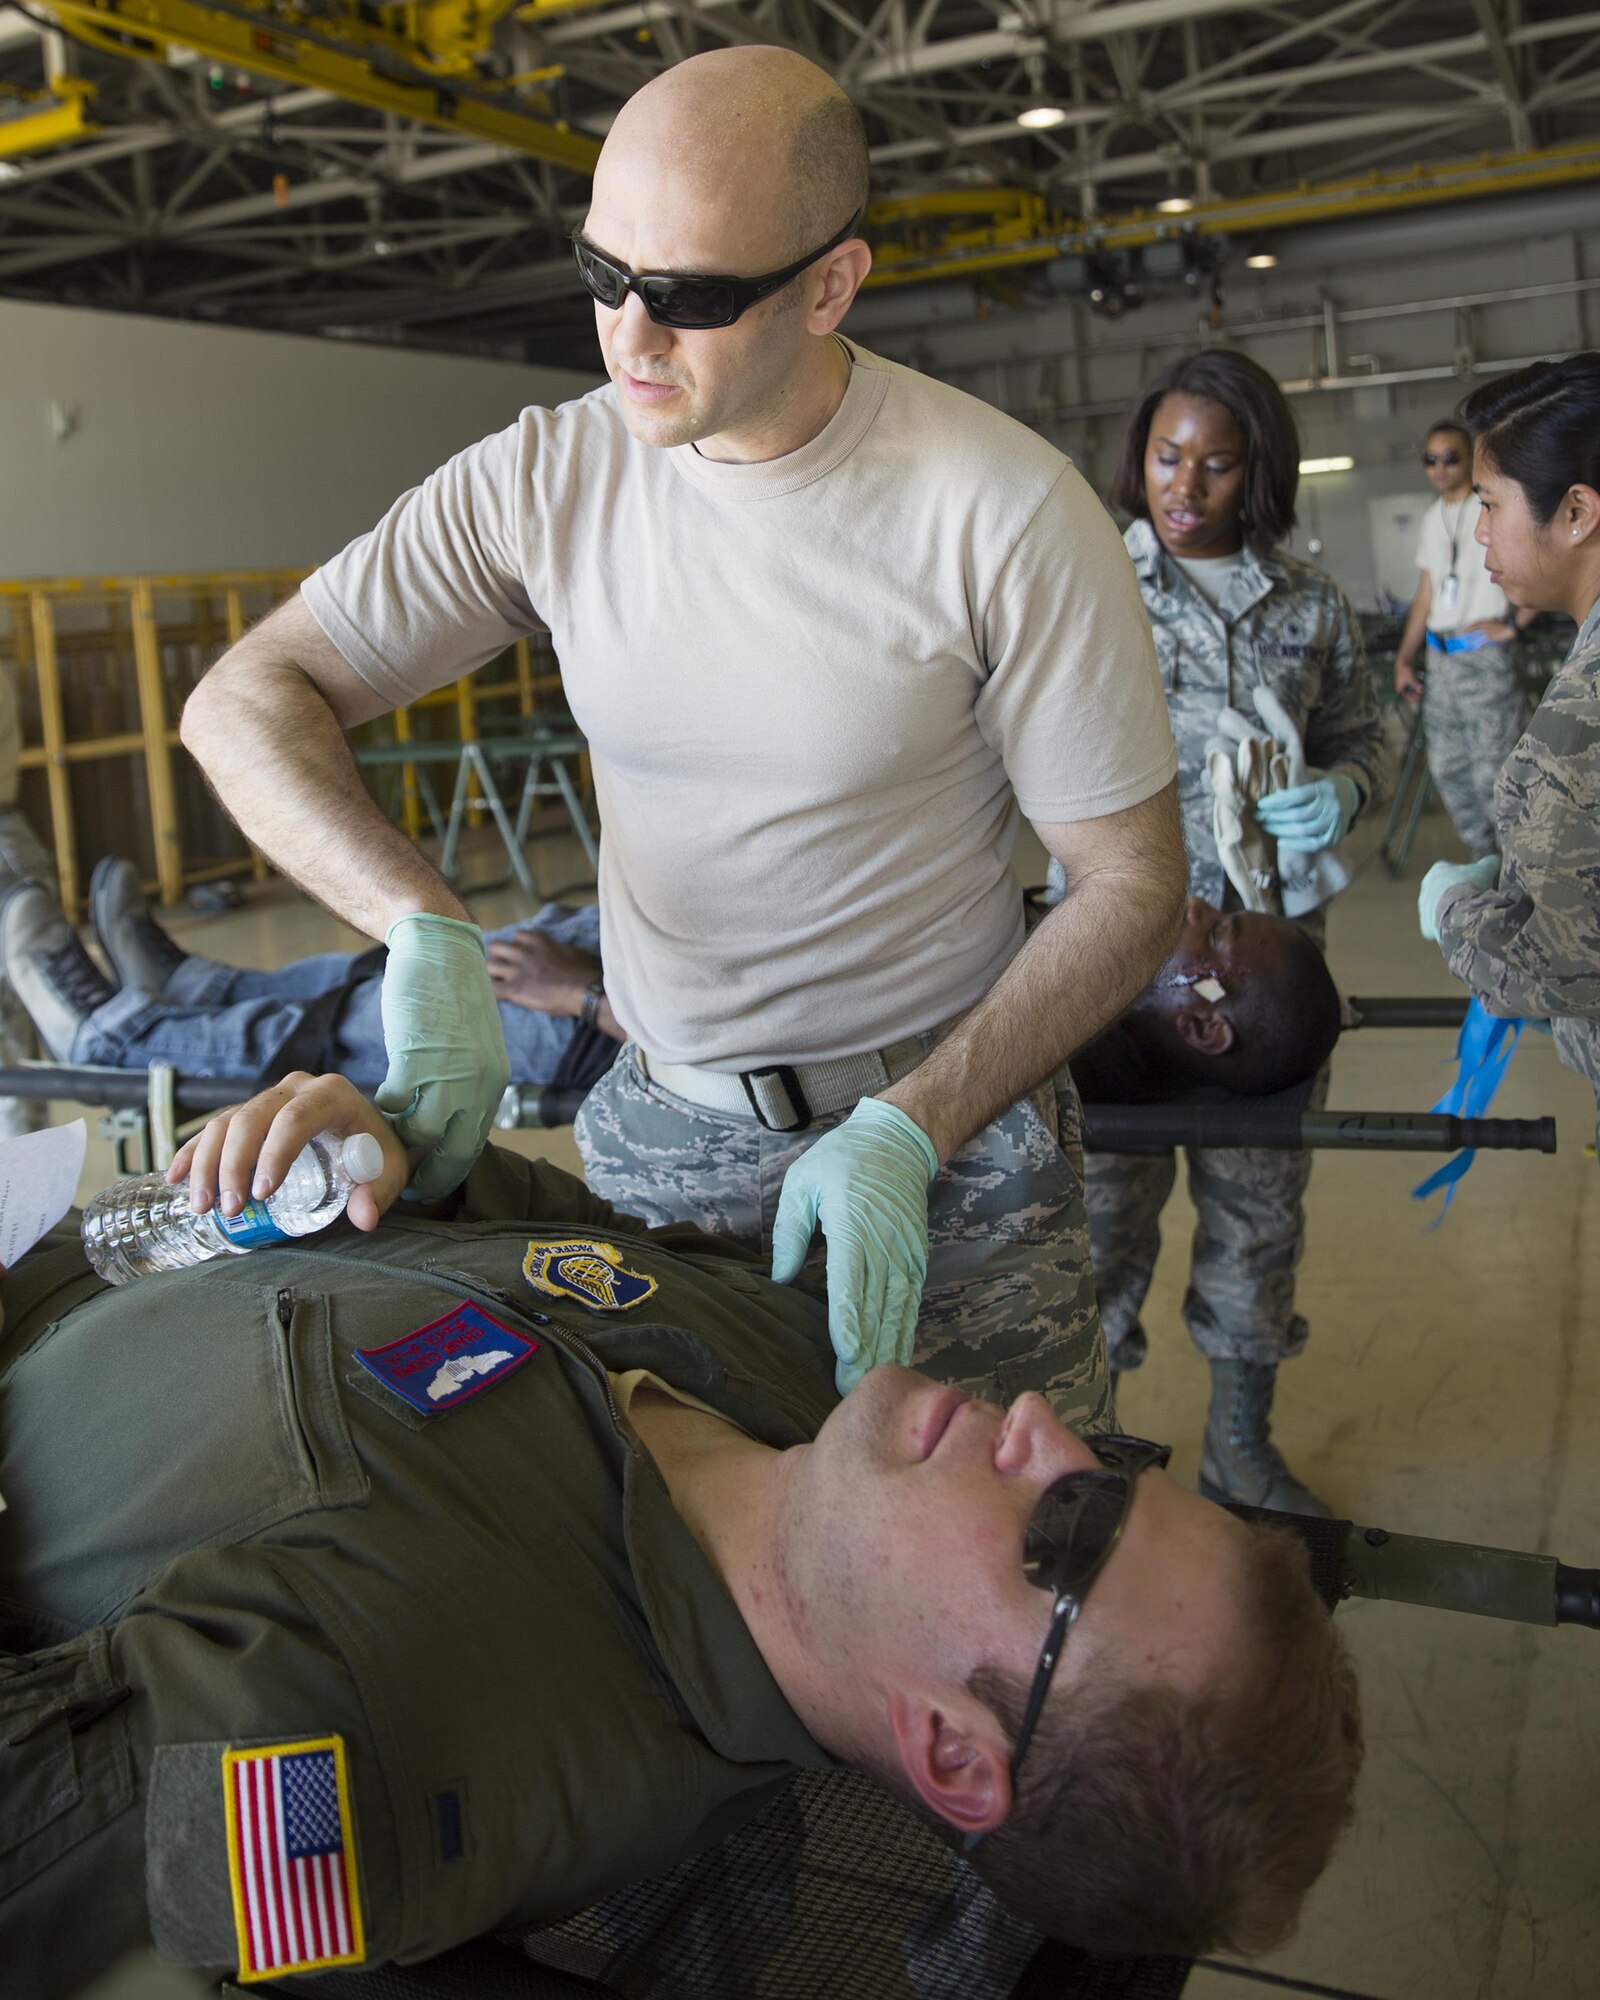 U.S. Air Force Capt. Robert Alexander, 374th Aerospace Medicine Squadron, checks the vitals of a simulated victim during an Emergency Management Exercise at Yokota Air Base, Japan, July 13, 2015. The EME trained Yokota for possible real-world situations requiring response and communication between on organizations. (U.S. Air Force photo by Osakabe Yasuo/Released)
